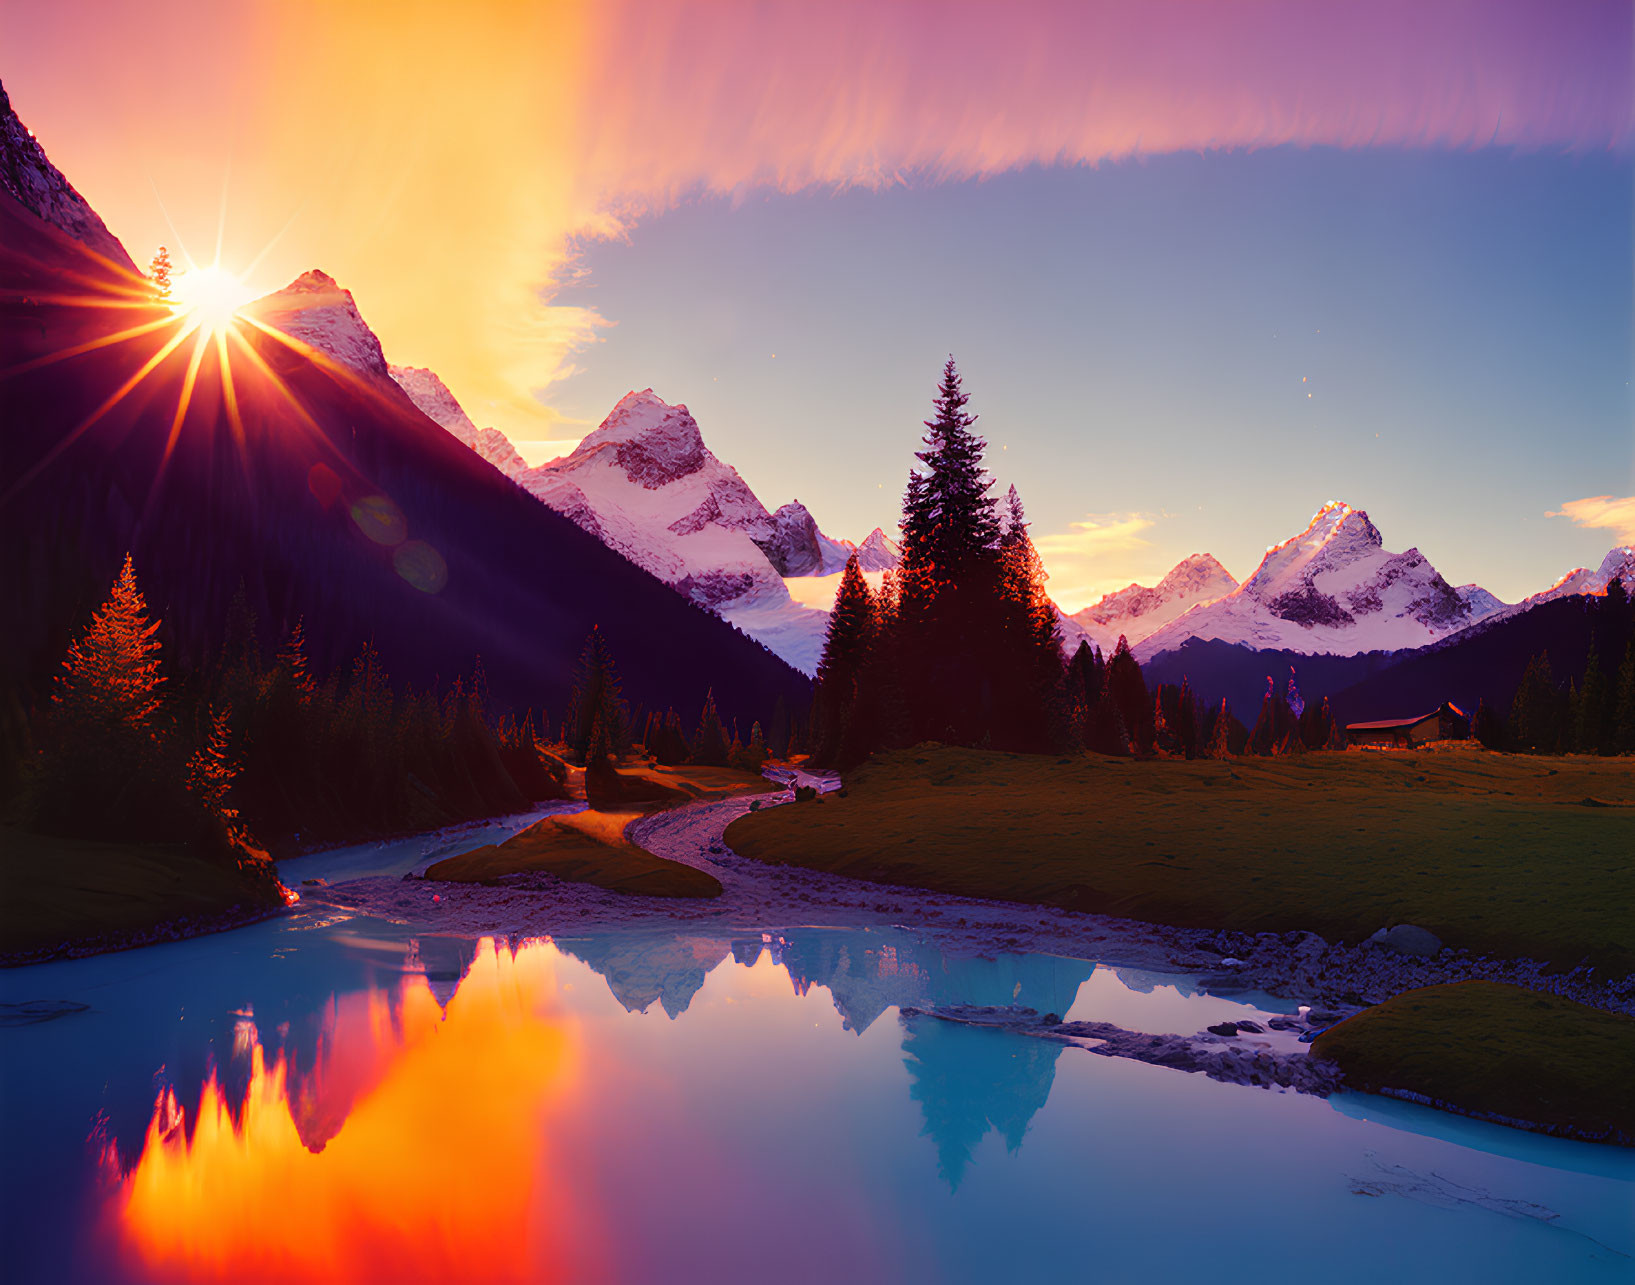 Scenic sunset over snow-capped mountains and river.